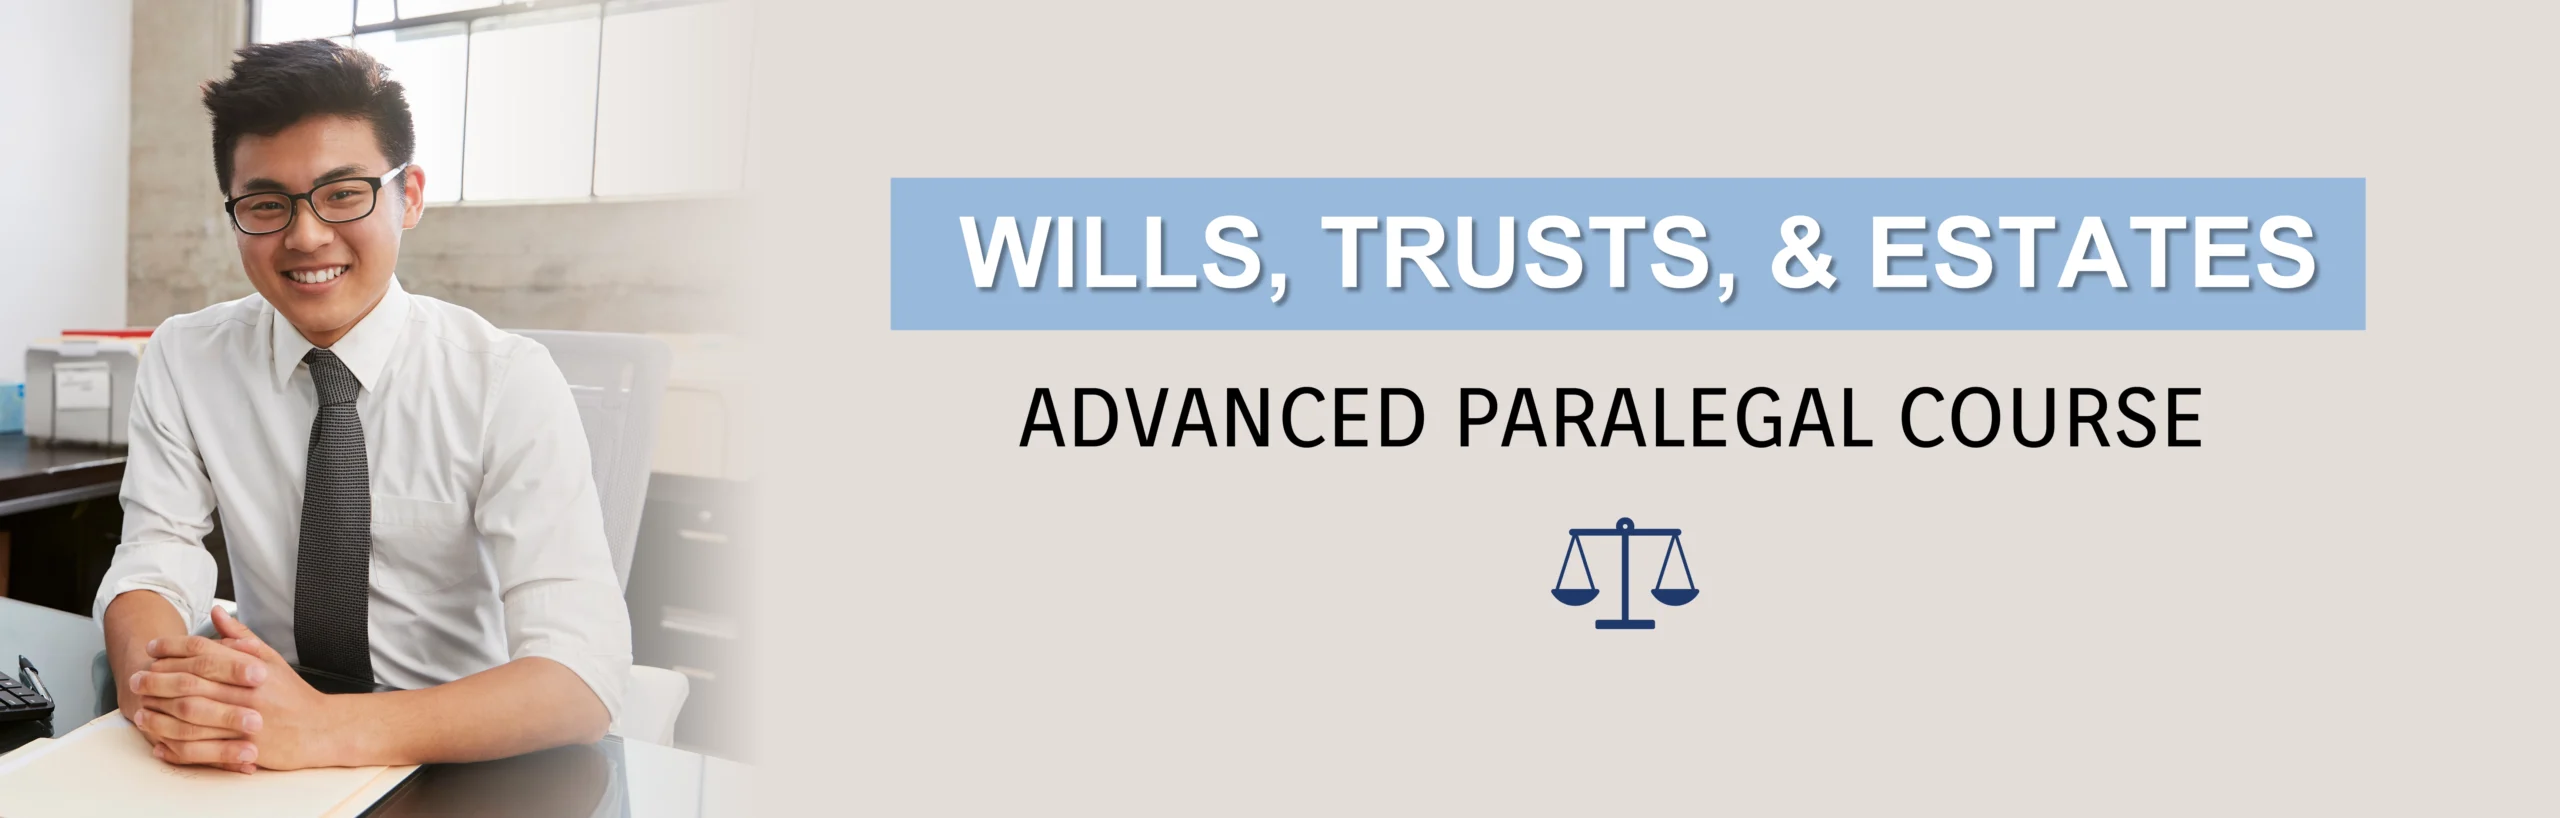 Wills Trusts and Estates Law Online Advanced Paralegal Course